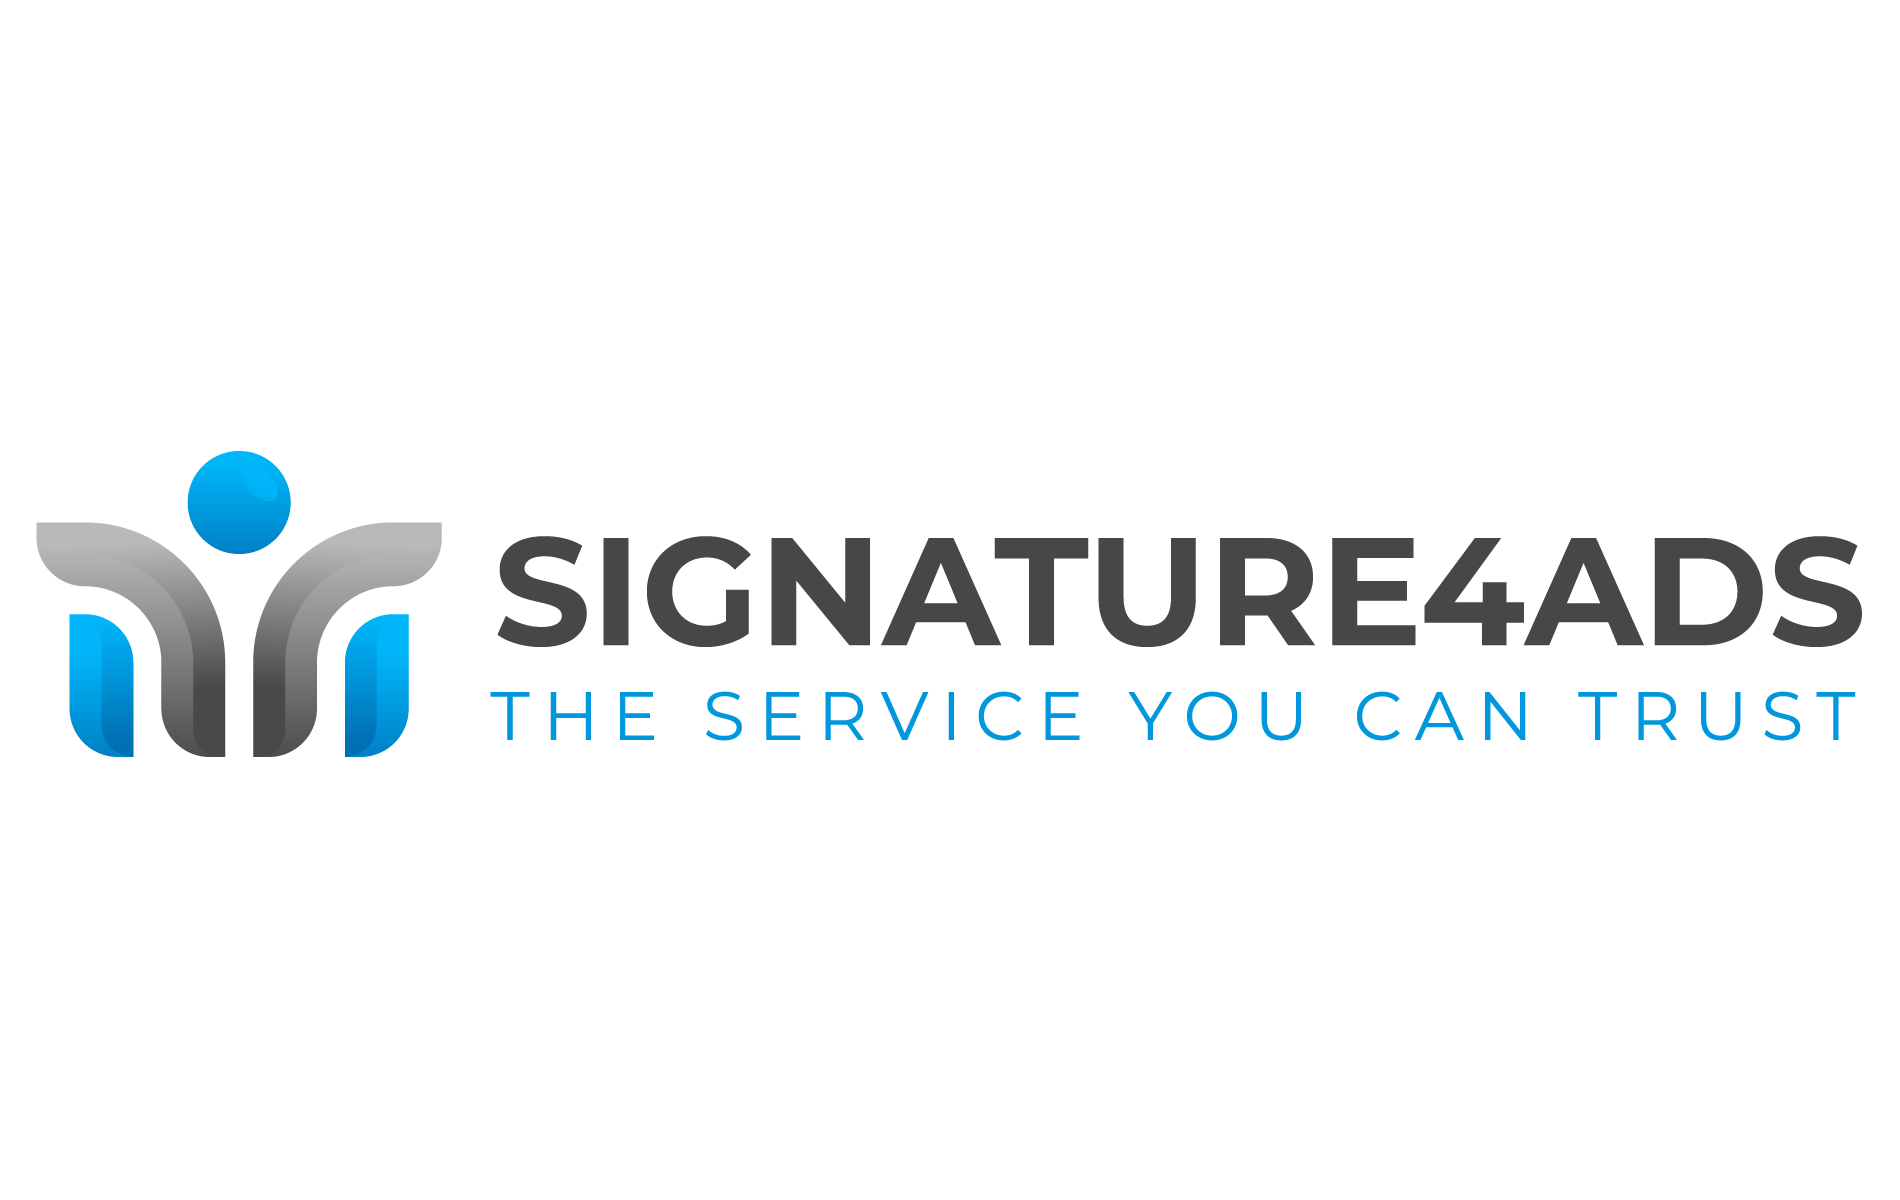 Signature4Ads Private Limited